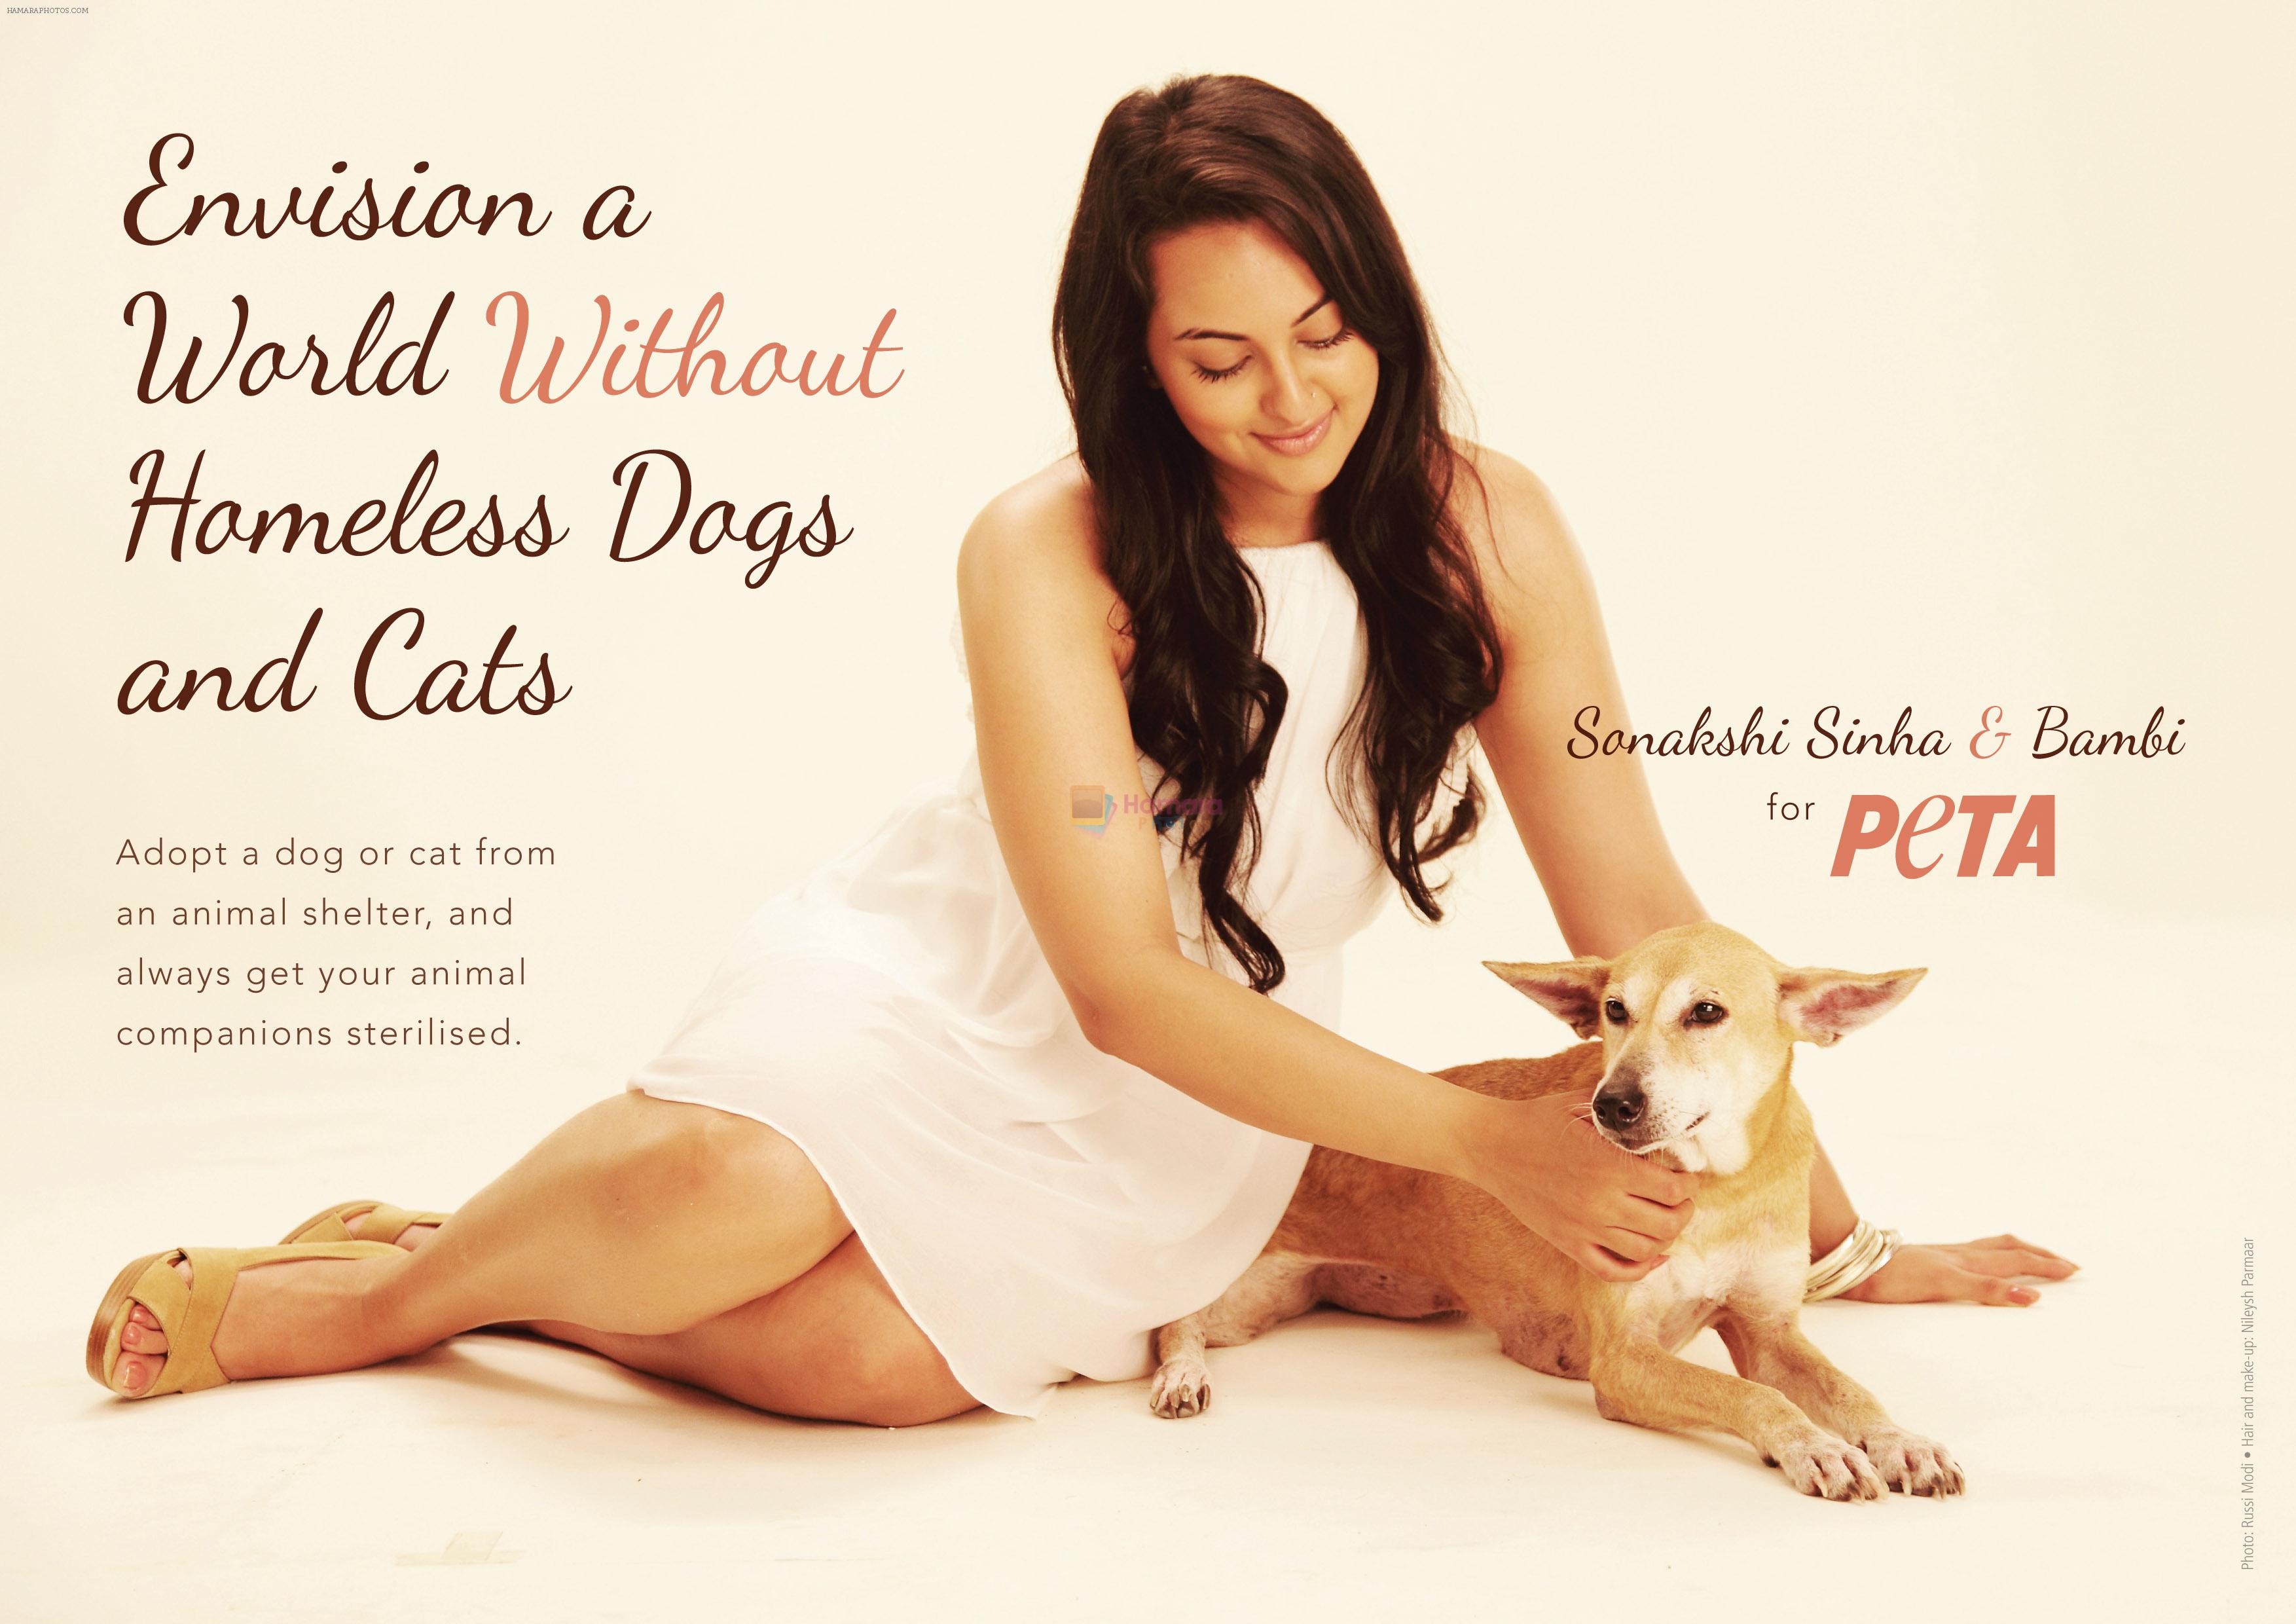 Sonakshi Sinha stars in a brand-new print ad for People for the Ethical Treatment of Animals